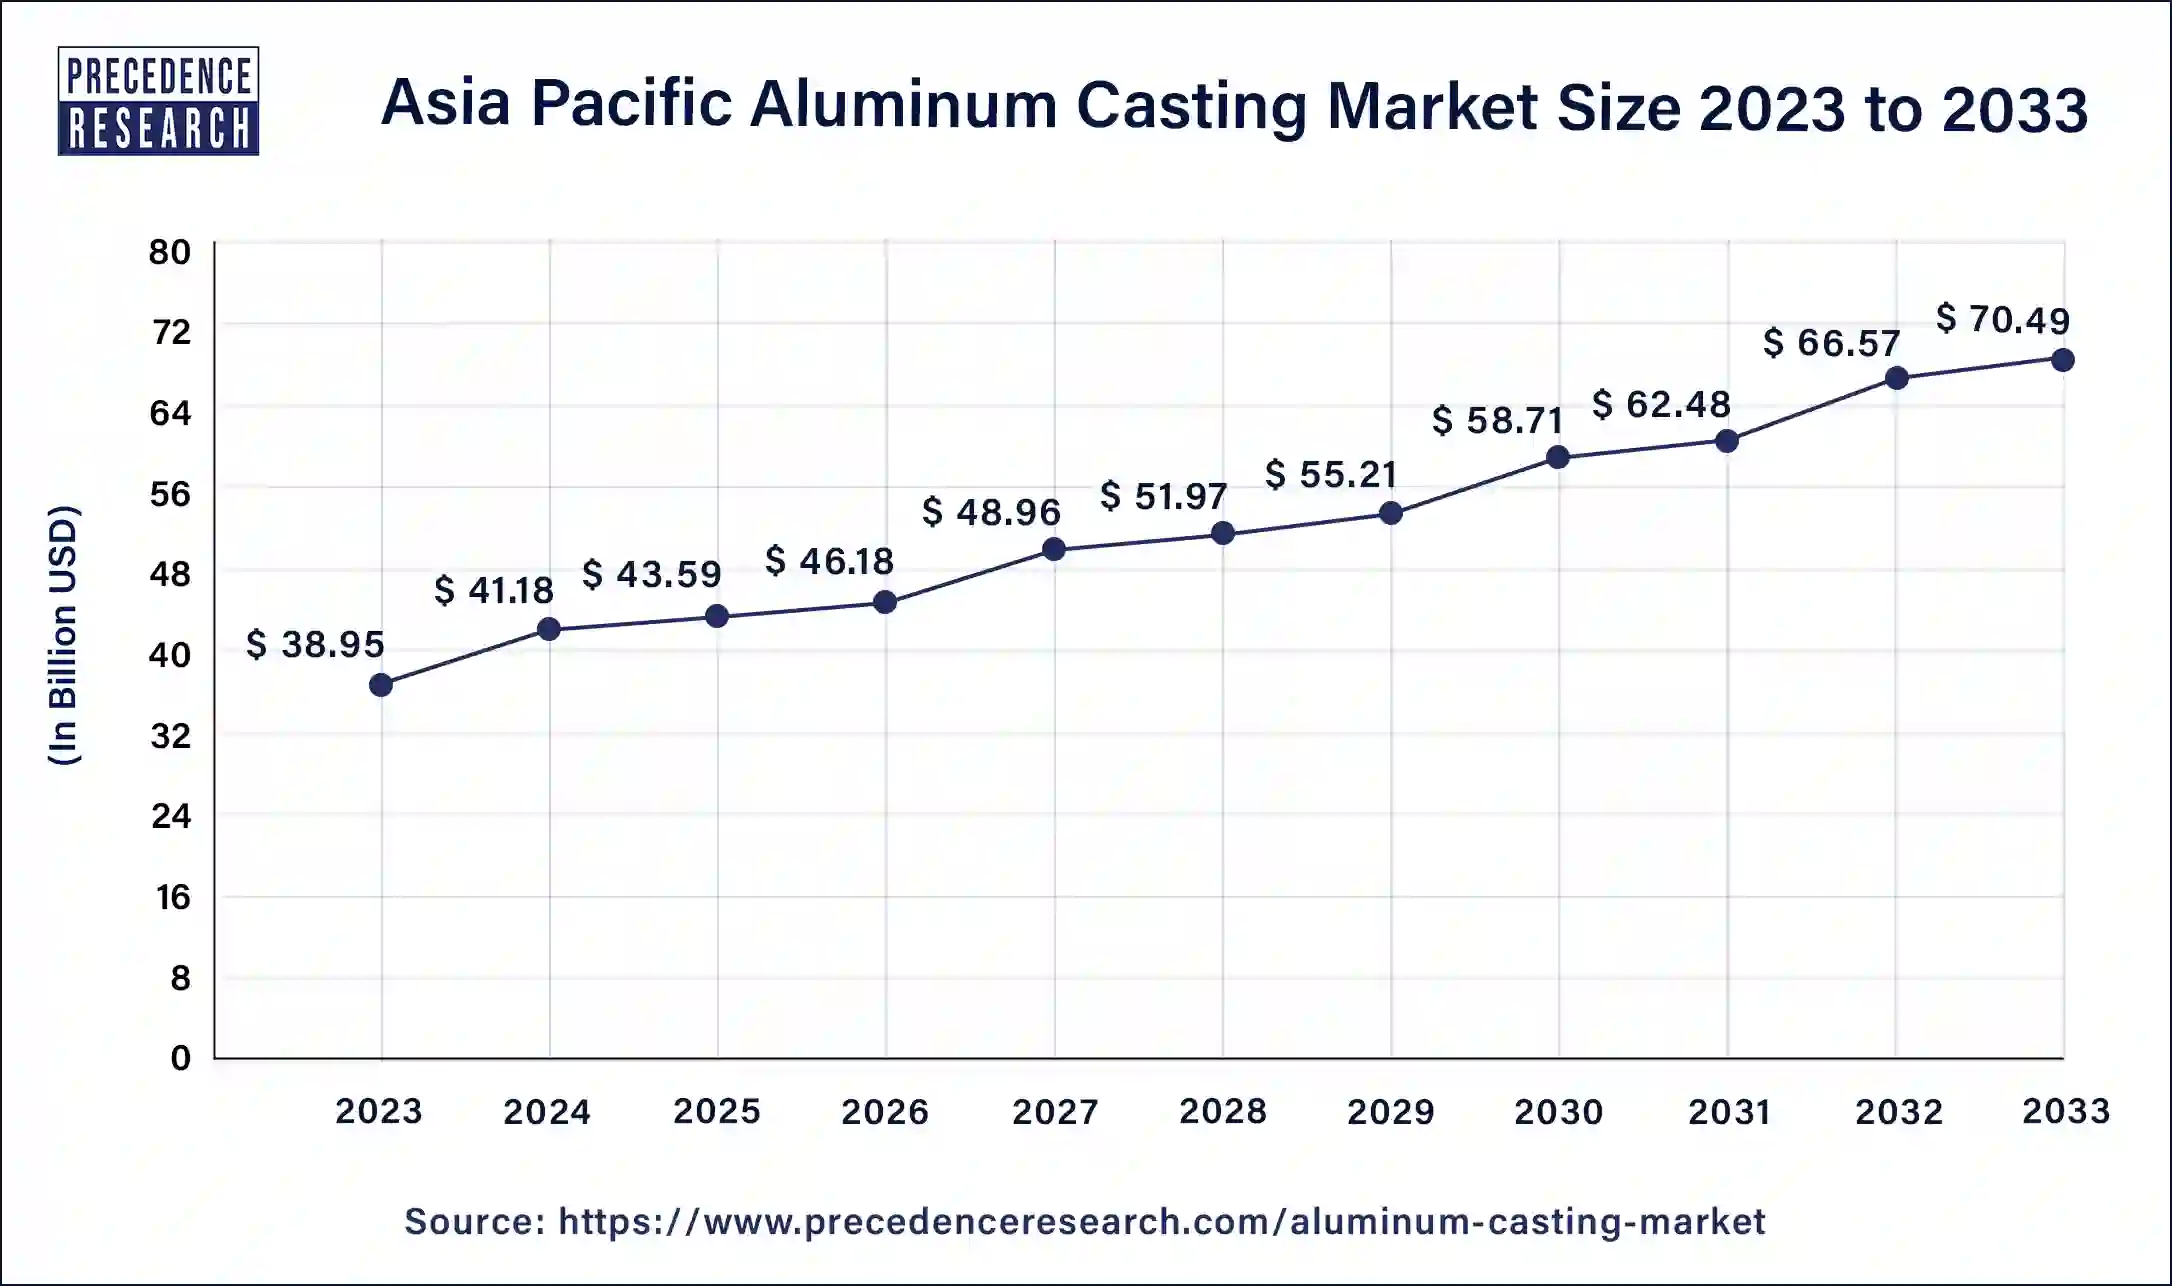 Asia Pacific Aluminum Casting Market Size 2024 to 2033